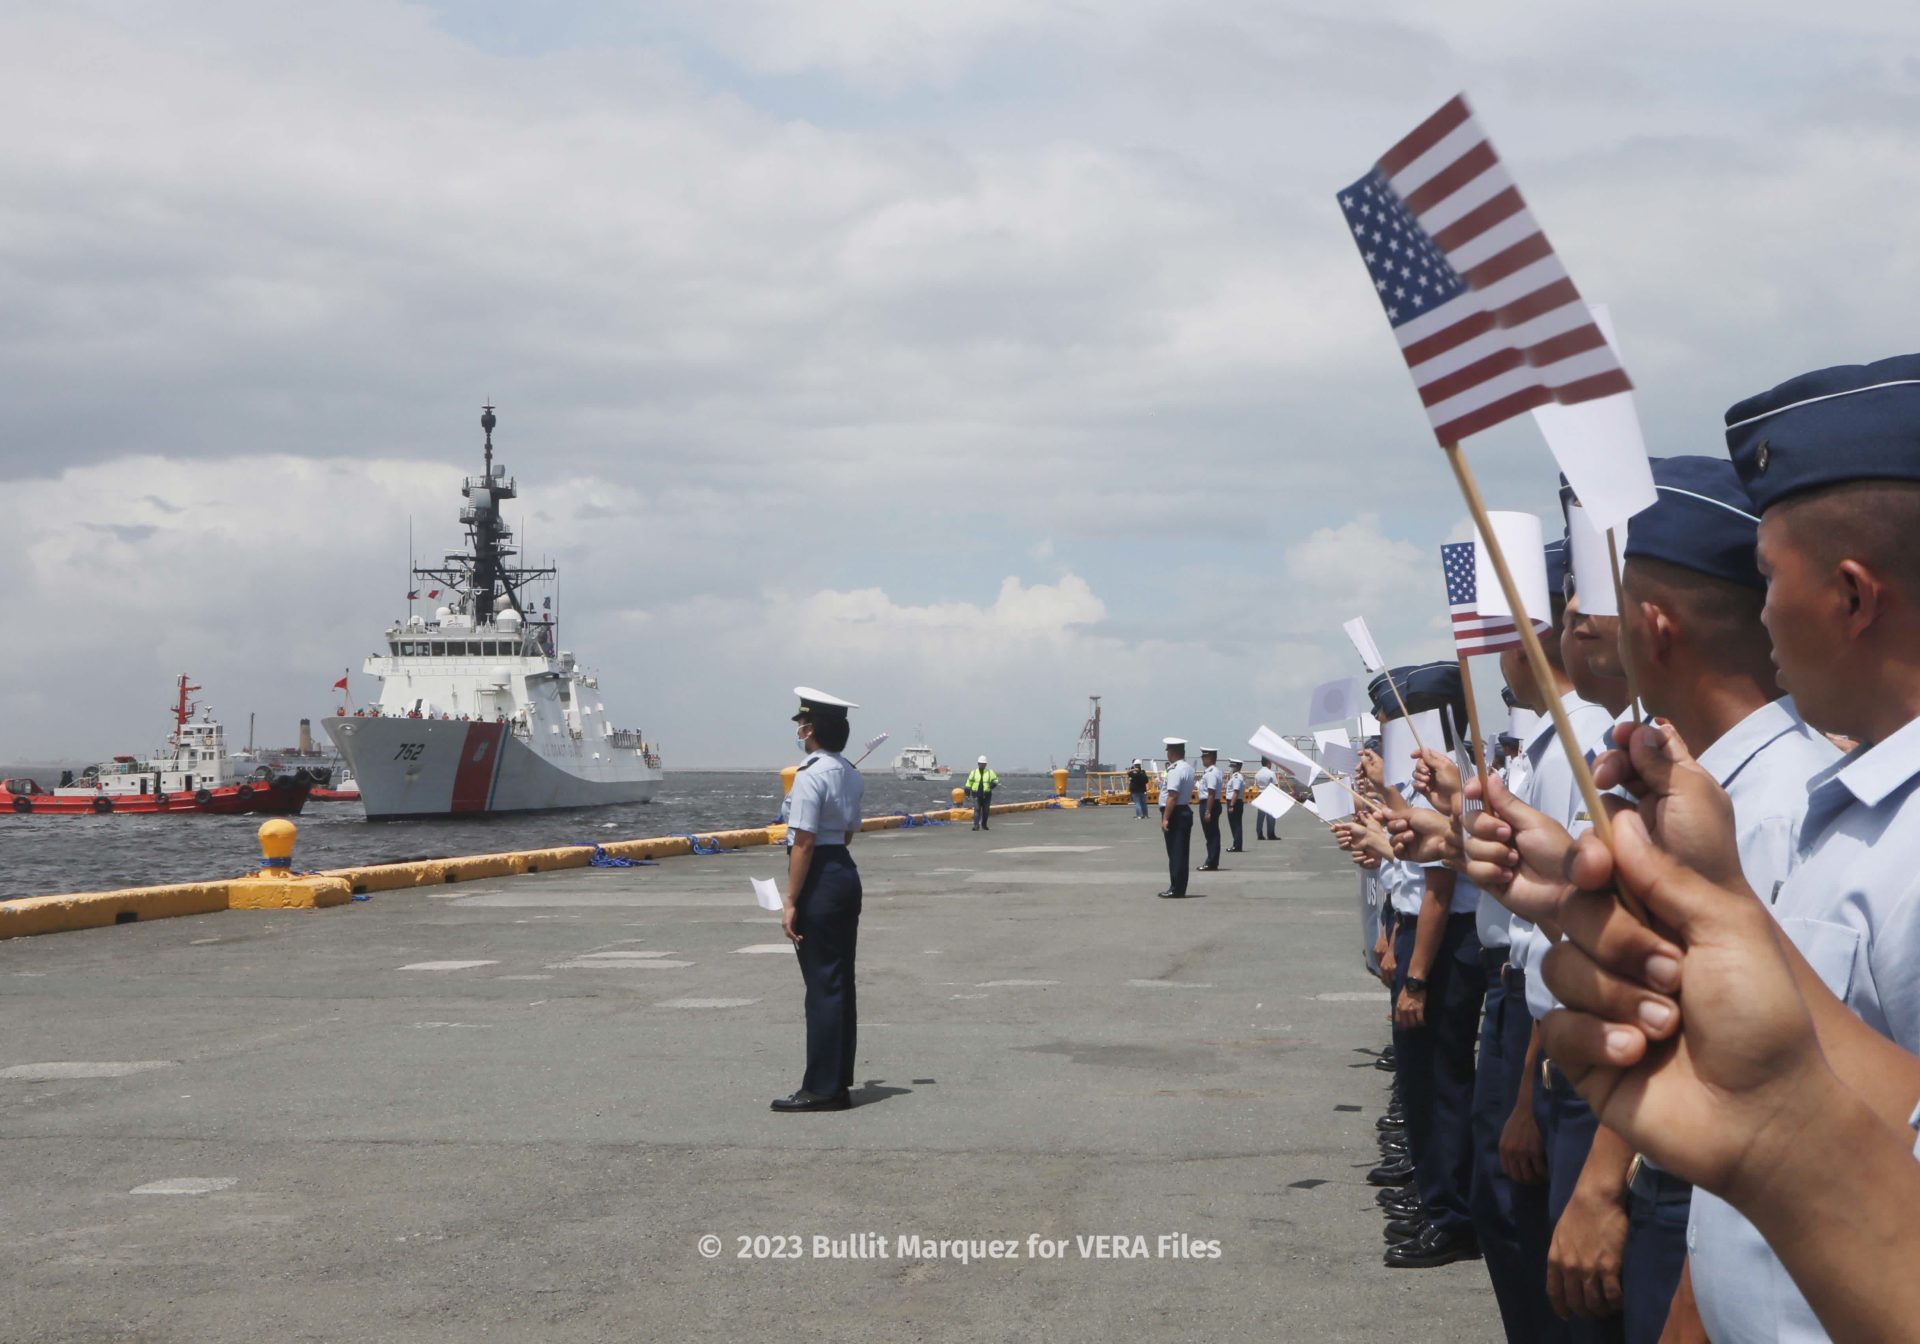 060123 Japan US Coast Guard in PH 1/11 Photo by Bullit Marquez